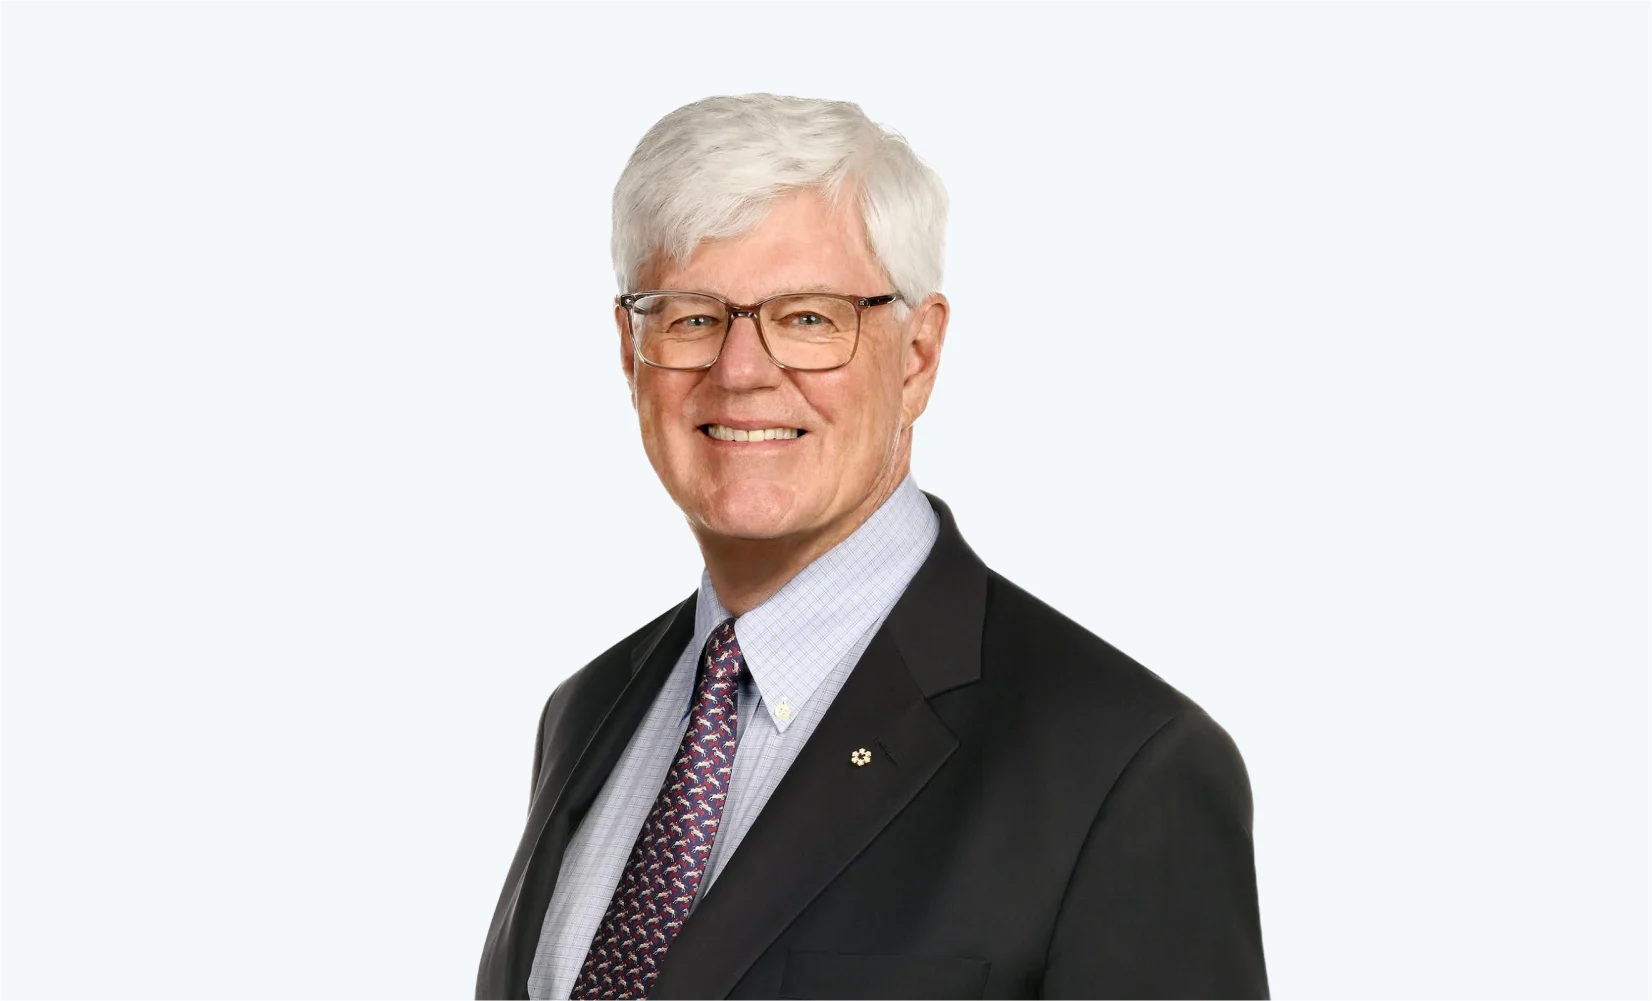 John Manley, corporate director and Chair of the Board of TELUS Corporation